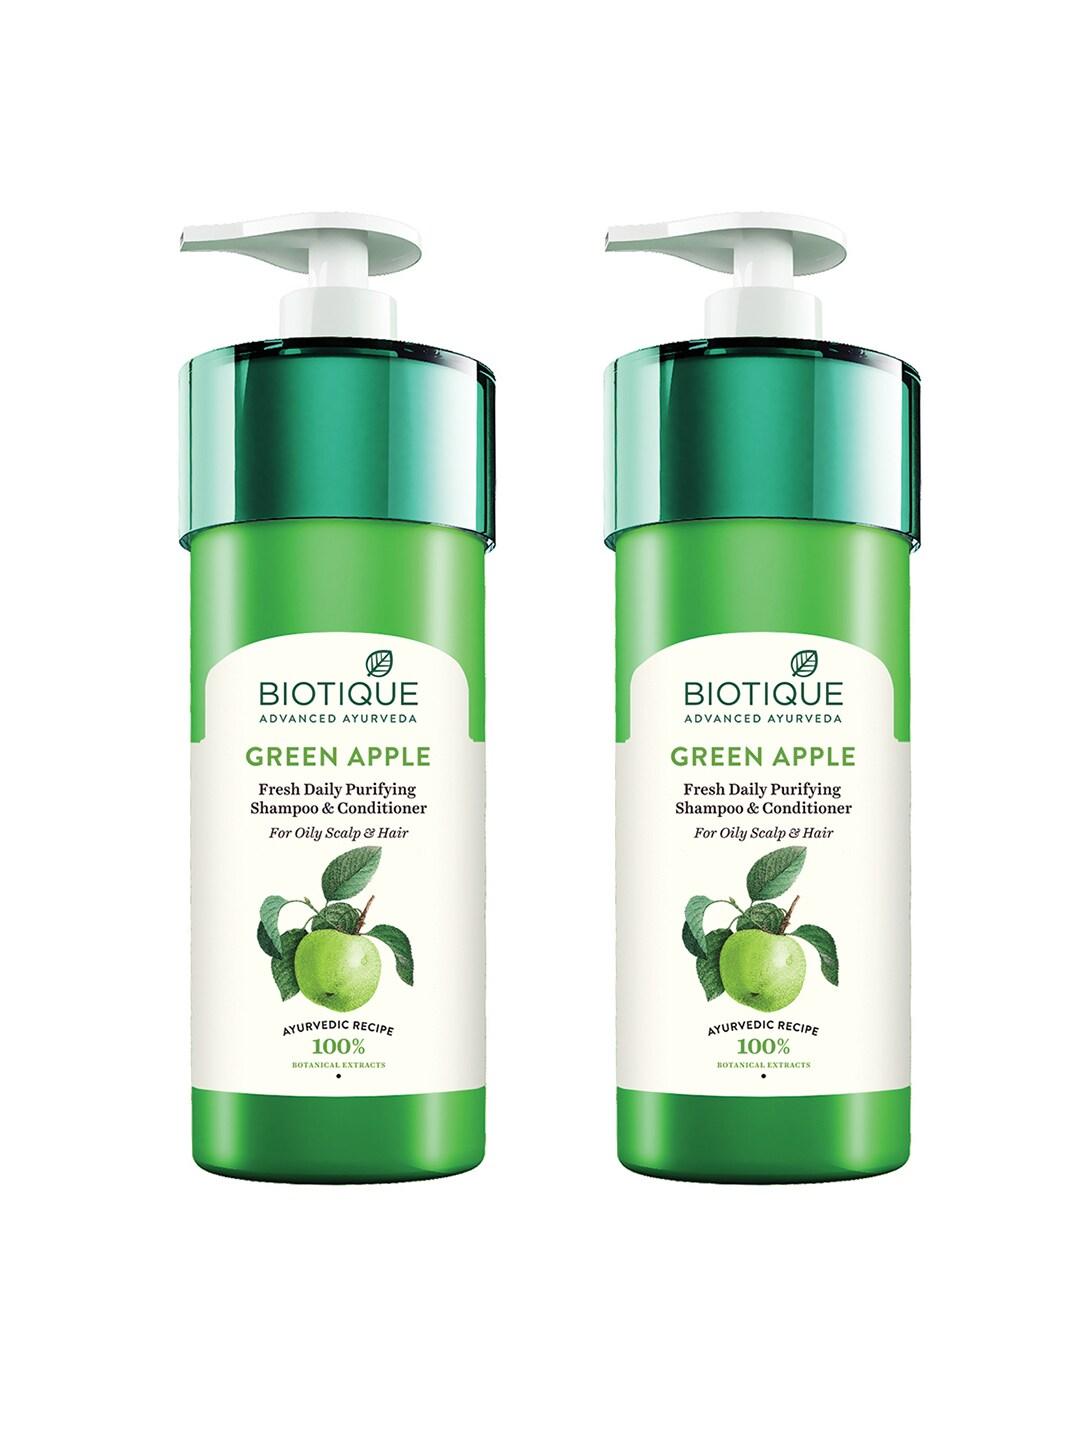 biotique-set-of-2-green-apple-fresh-daily-purifying-shampoo-&-conditioner---800ml-each